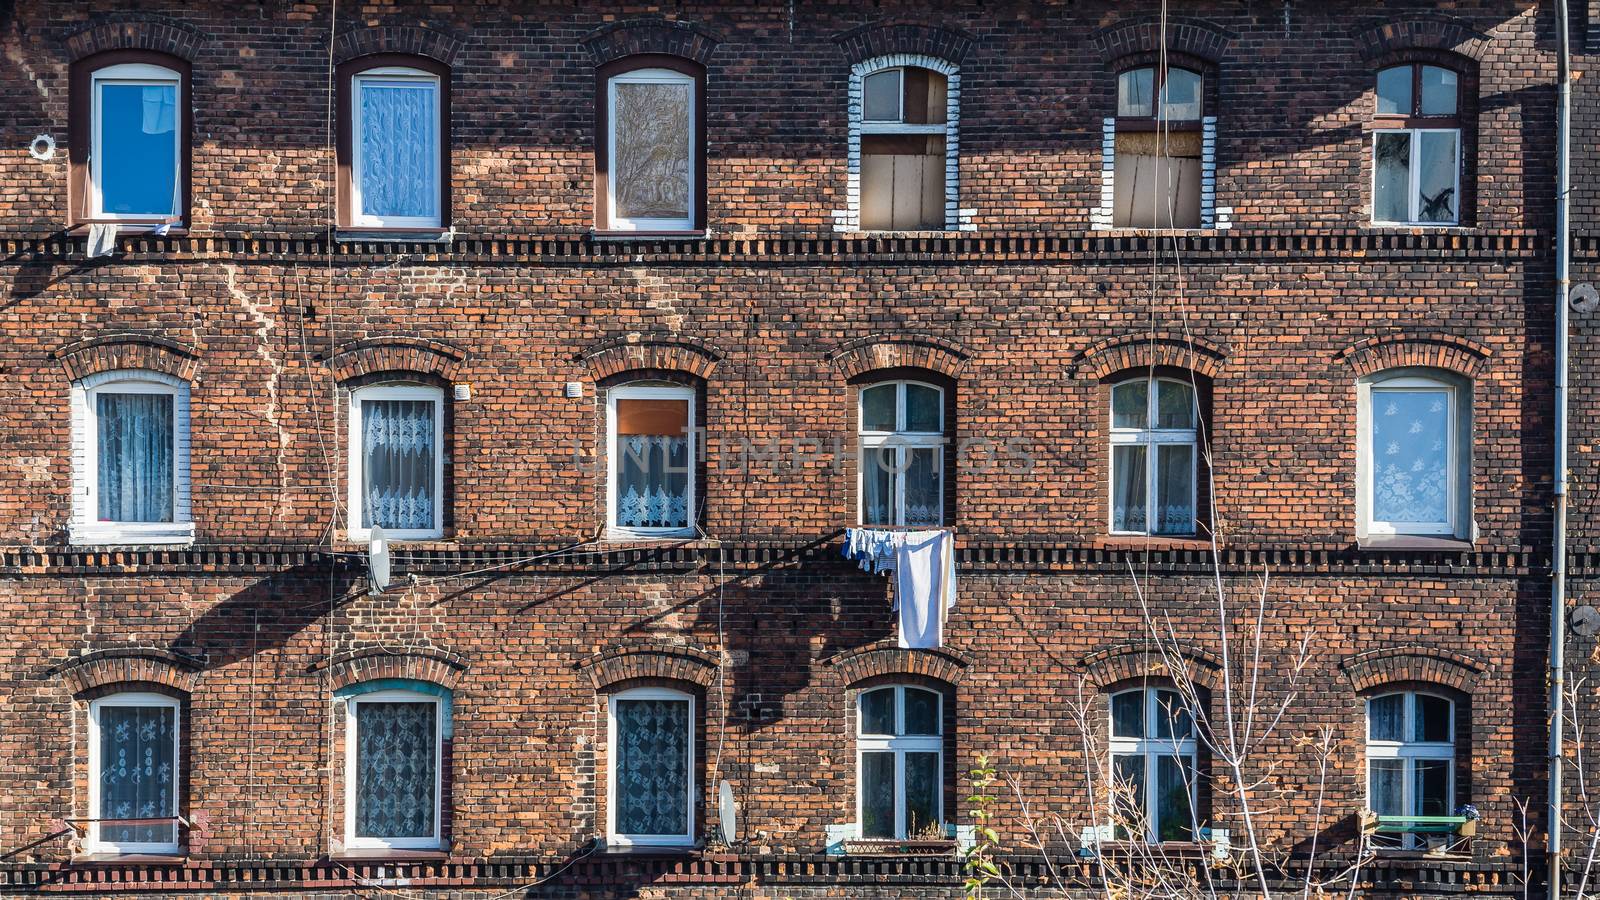 Facade of a typical miners house by pawel_szczepanski